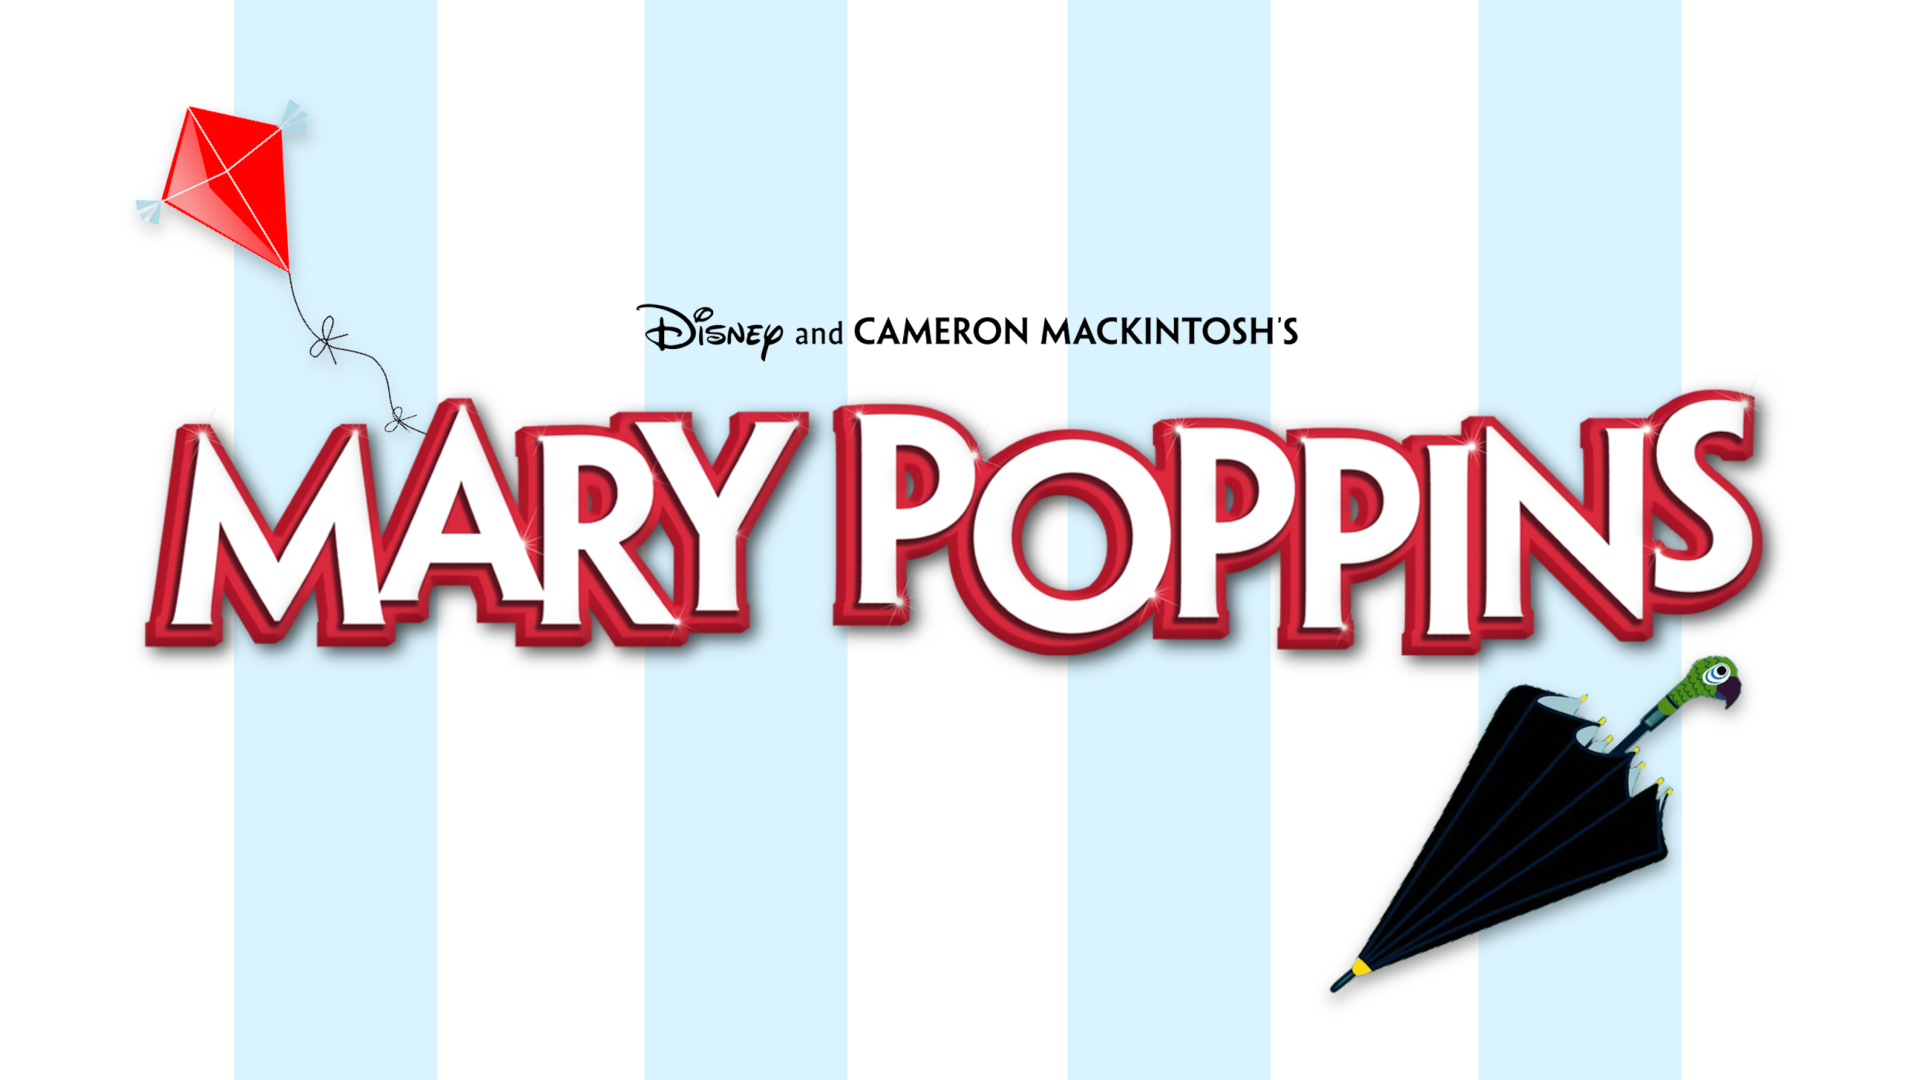 Bravo's Mary Poppins Comes to Franklin!